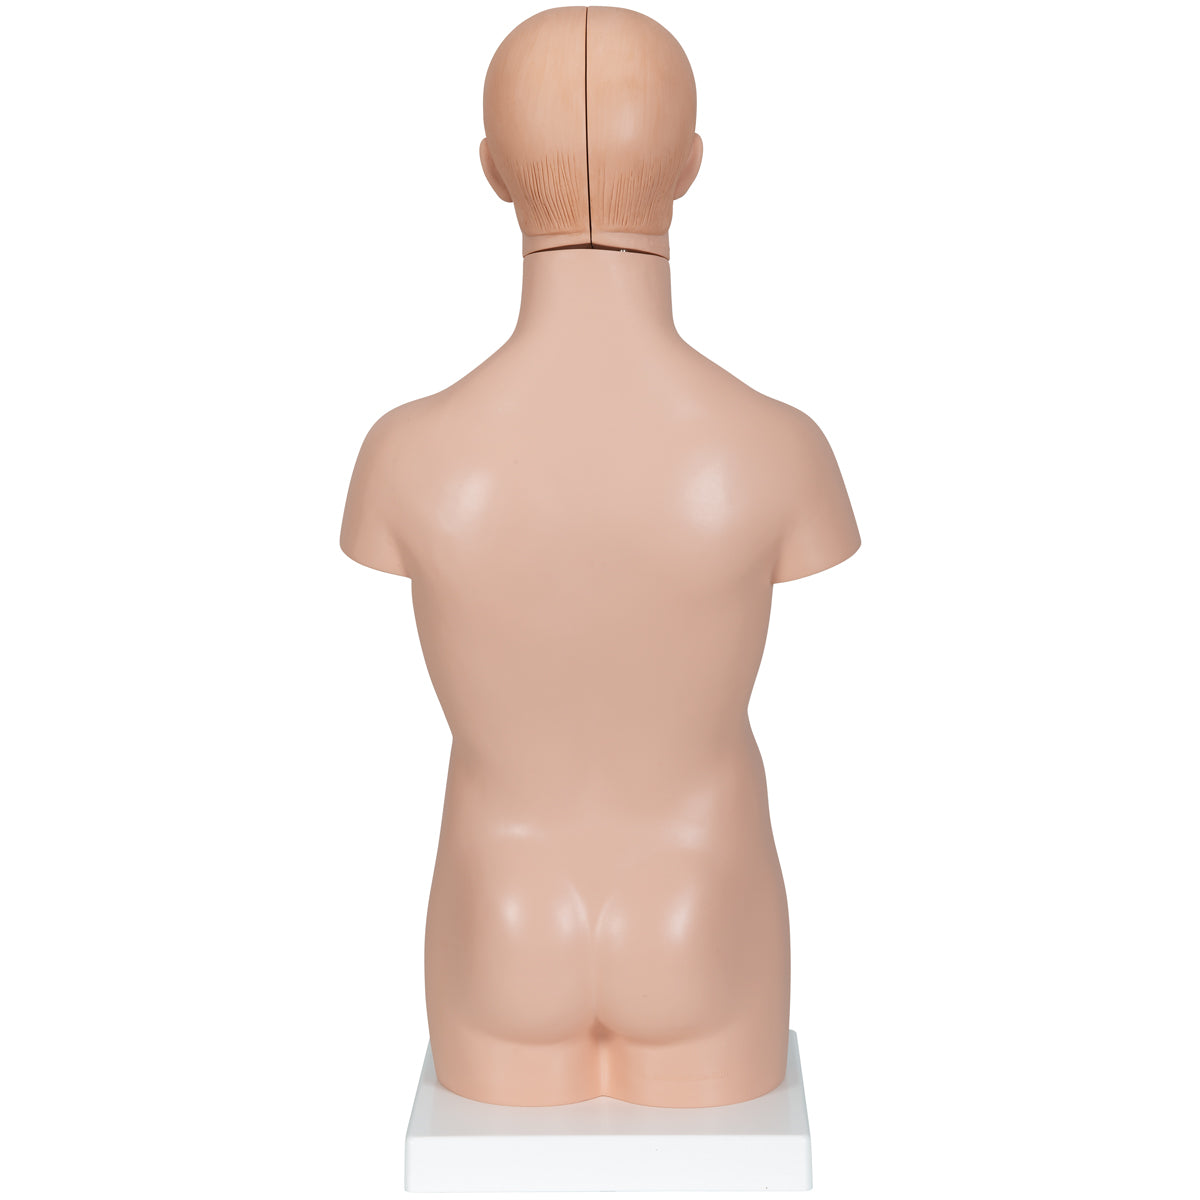 Reduced torso model in 12 parts without genitalia